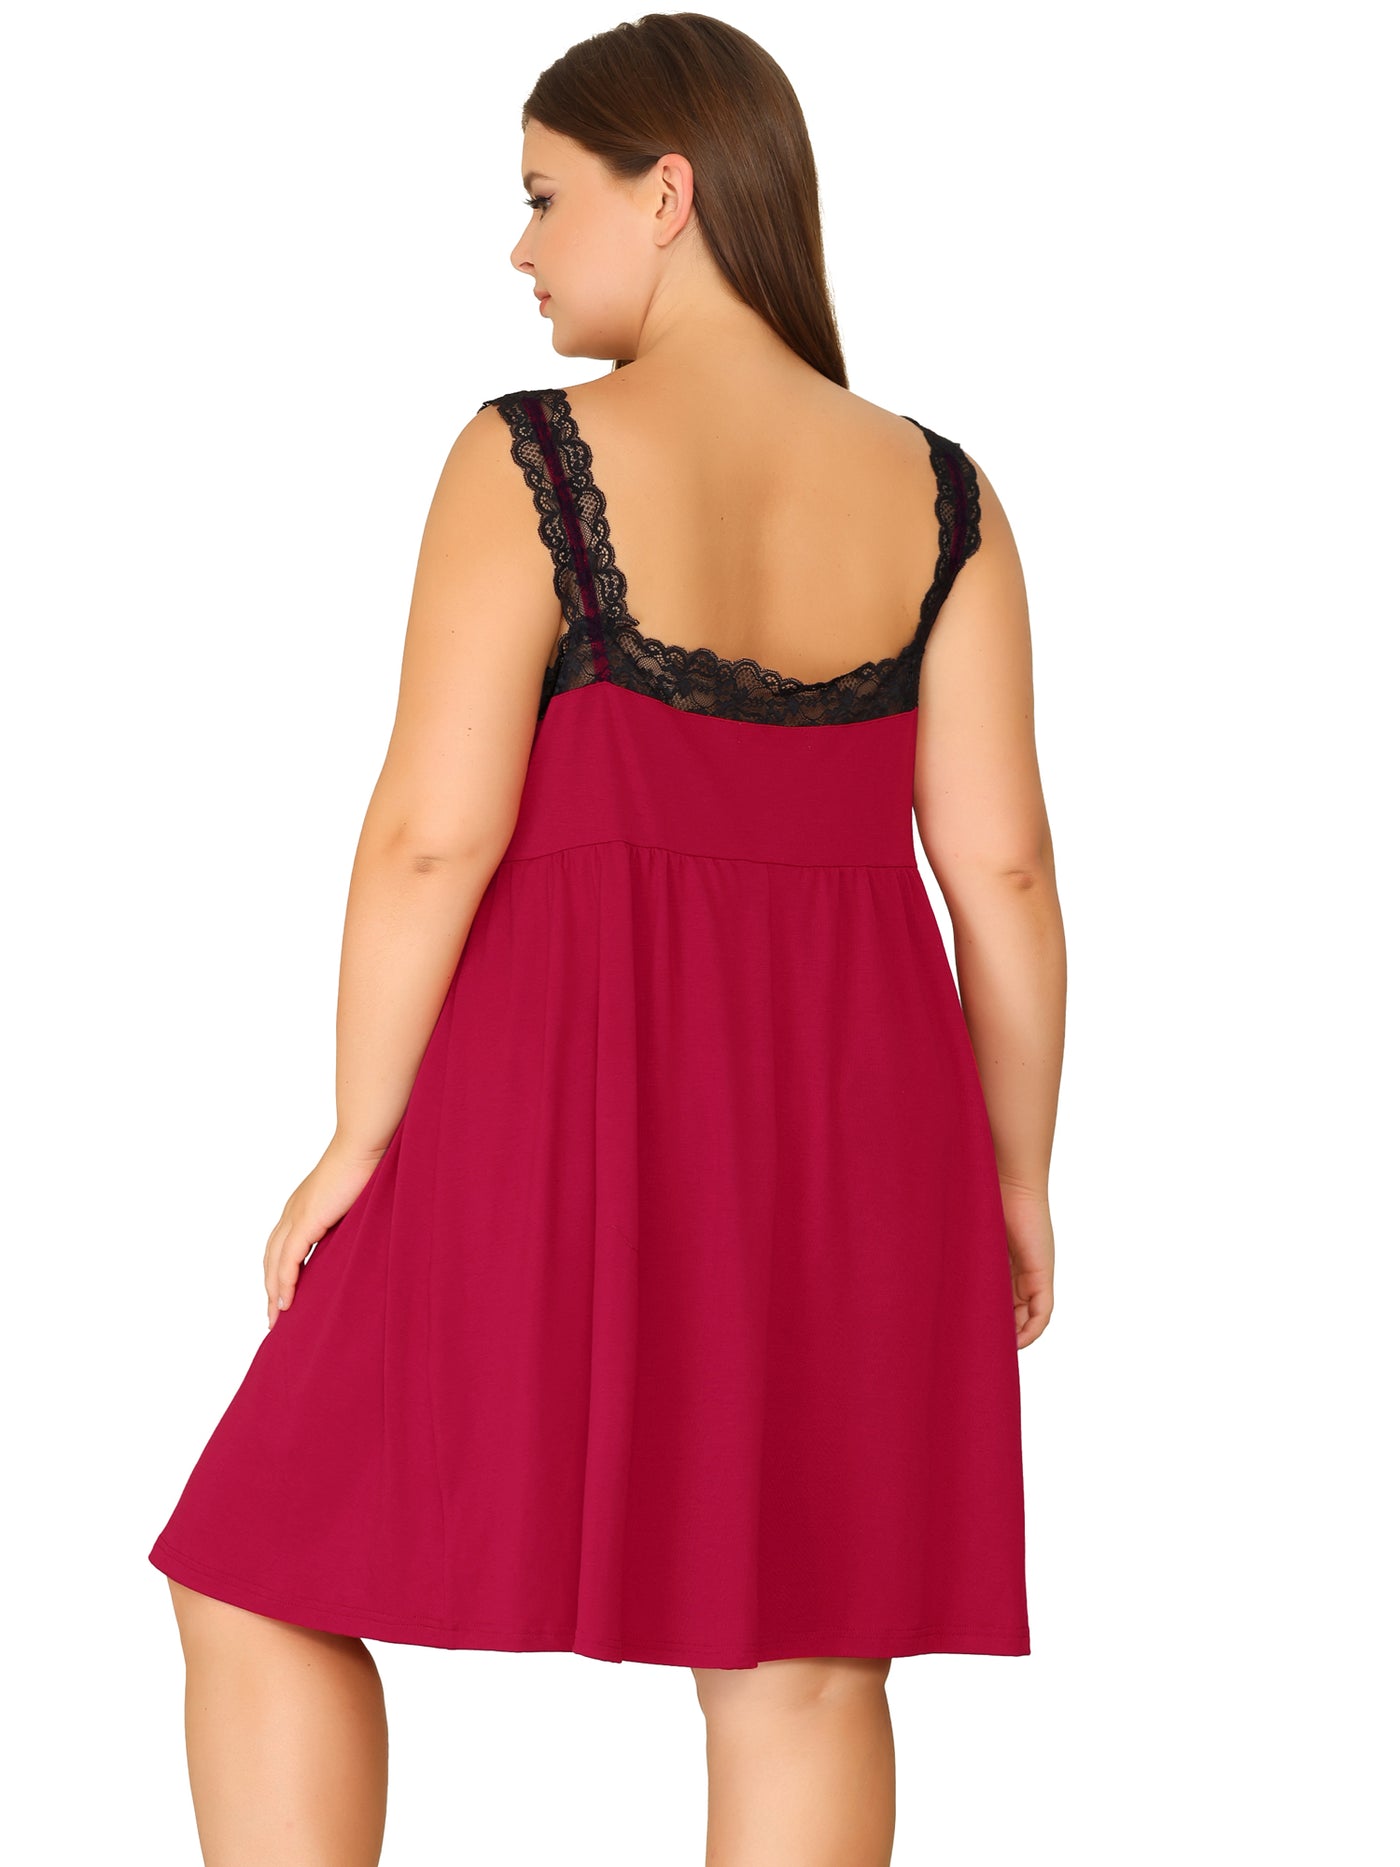 Bublédon Plus Size Cami Nightgown Lace Sleep Above Knee Lounge Nightgowns